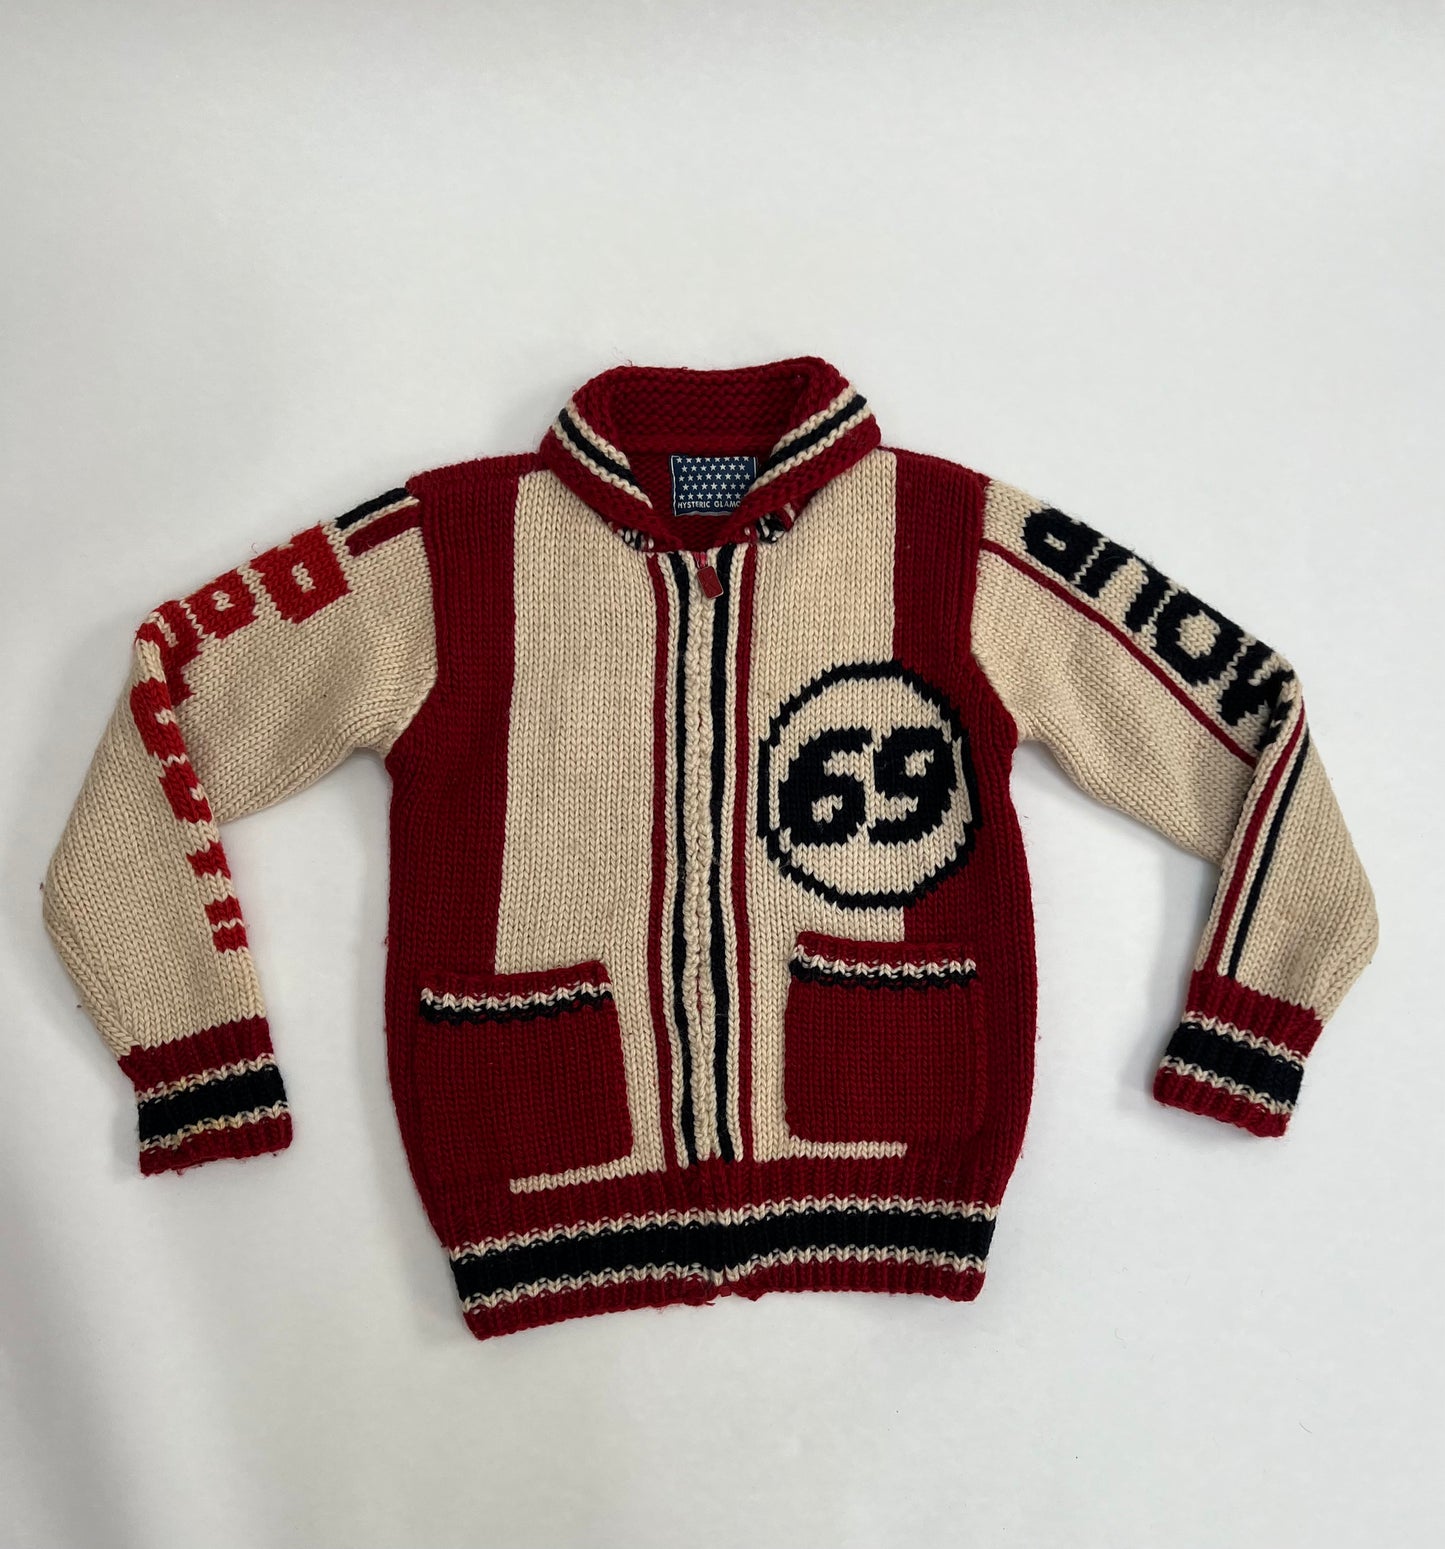 Hysteric Glamour 69 zip up sweater